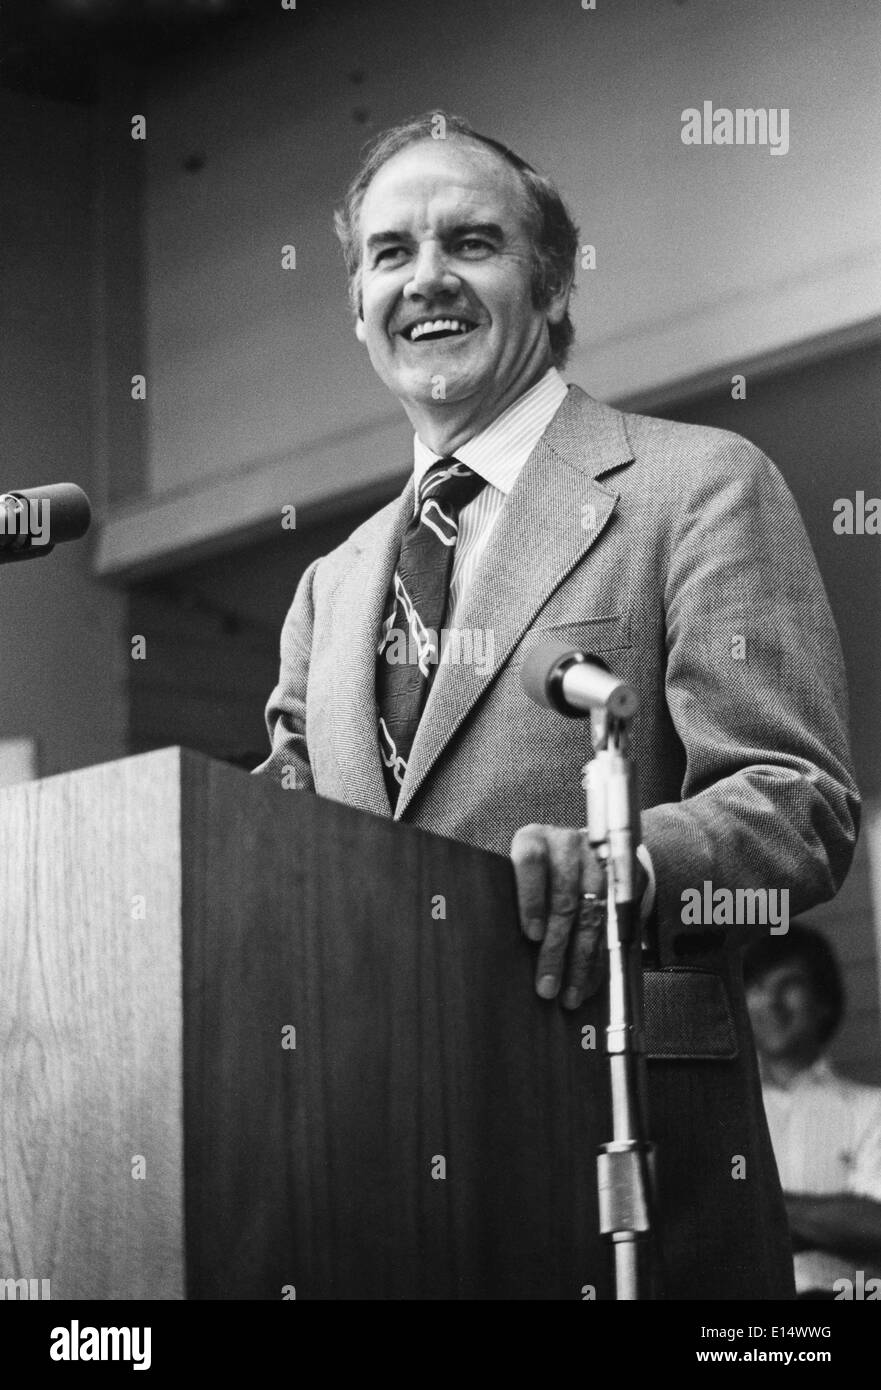 George McGovern, a decorated WWII bomber pilot who represented South Dakota in the House and the Senate, campaigned against U.S. involvement in Vietnam in his 1972 Democratic bid for the presidency and lost in a landslide to Richard M. Nixon, died Sunday Oct. 21, 2012. He was 90. PICTURED: Sep. 04, 1972 - Pleasanton, California, U.S. - Senator GEORGE MCGOVERN made his first appearance in California since his June Primary victory. He visited the Alameda County Labor Day Picnic at the fairgrounds. Stock Photo